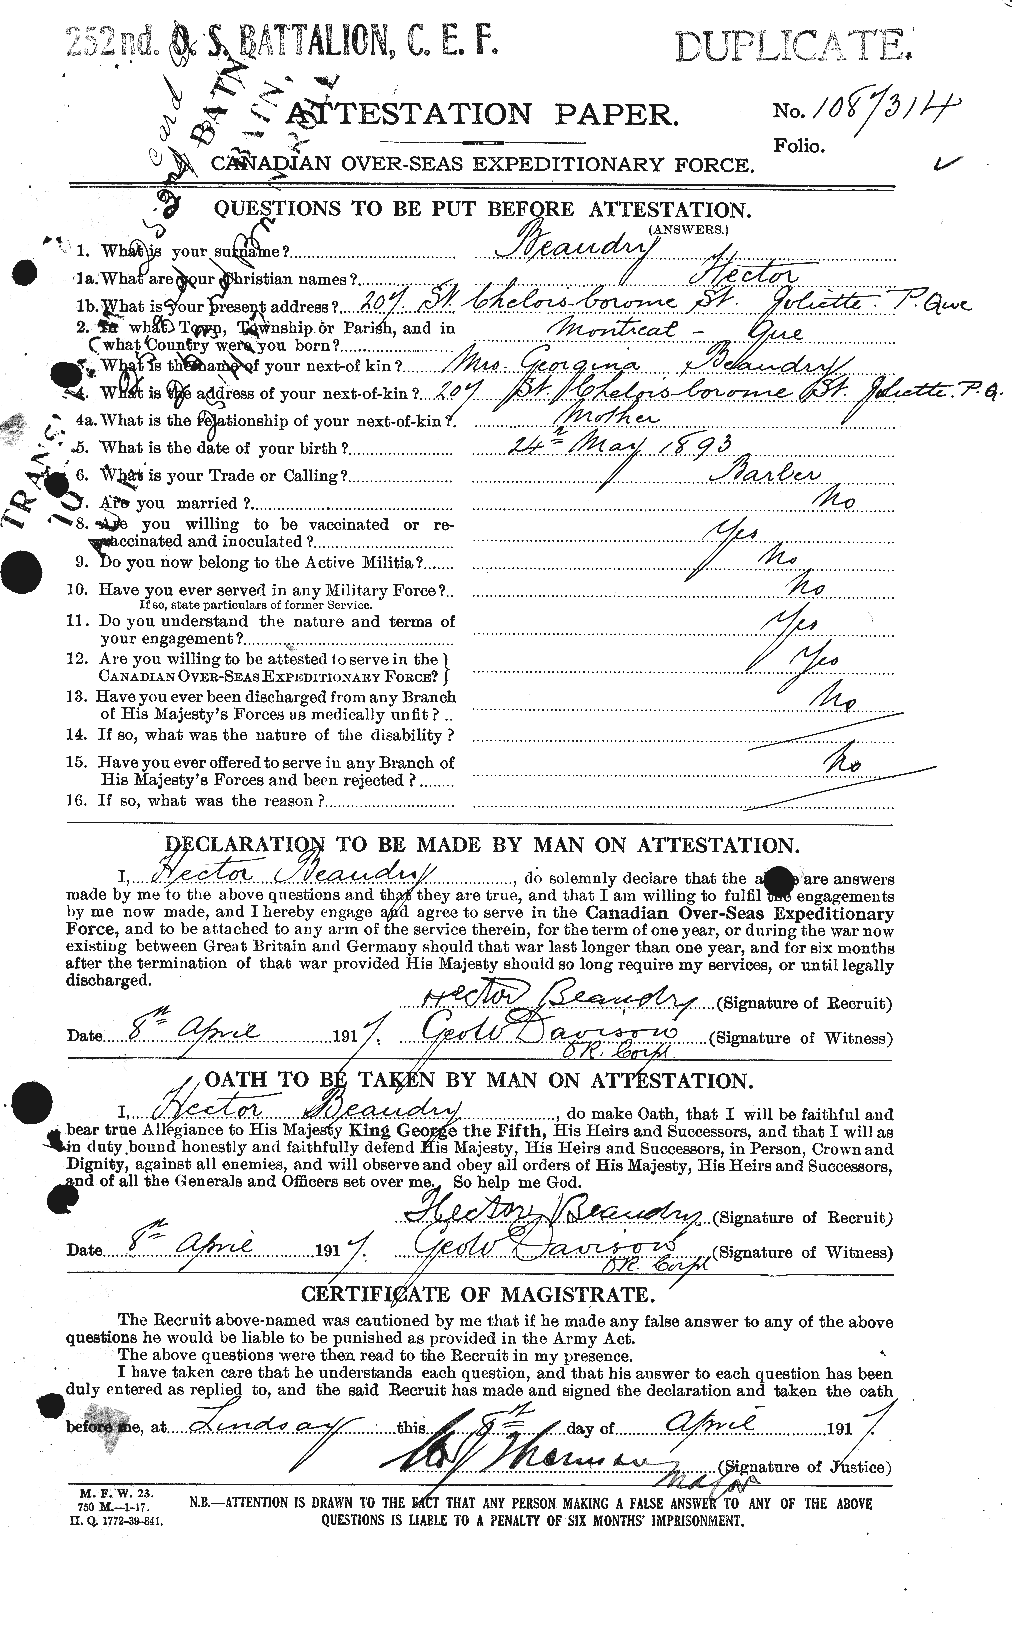 Personnel Records of the First World War - CEF 231362a